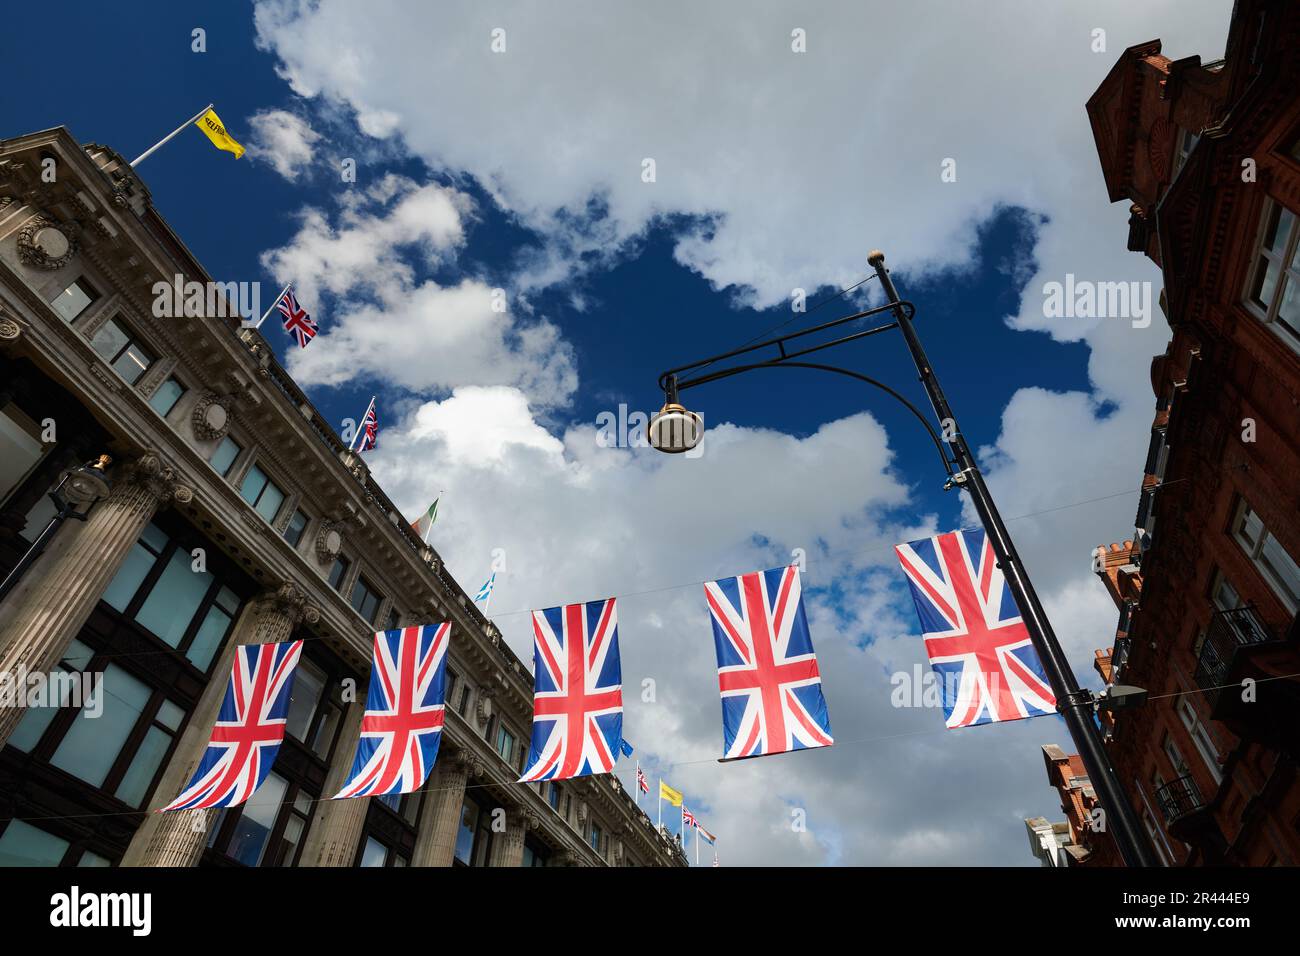 Union Jack flags proudly on display in central London Stock Photo